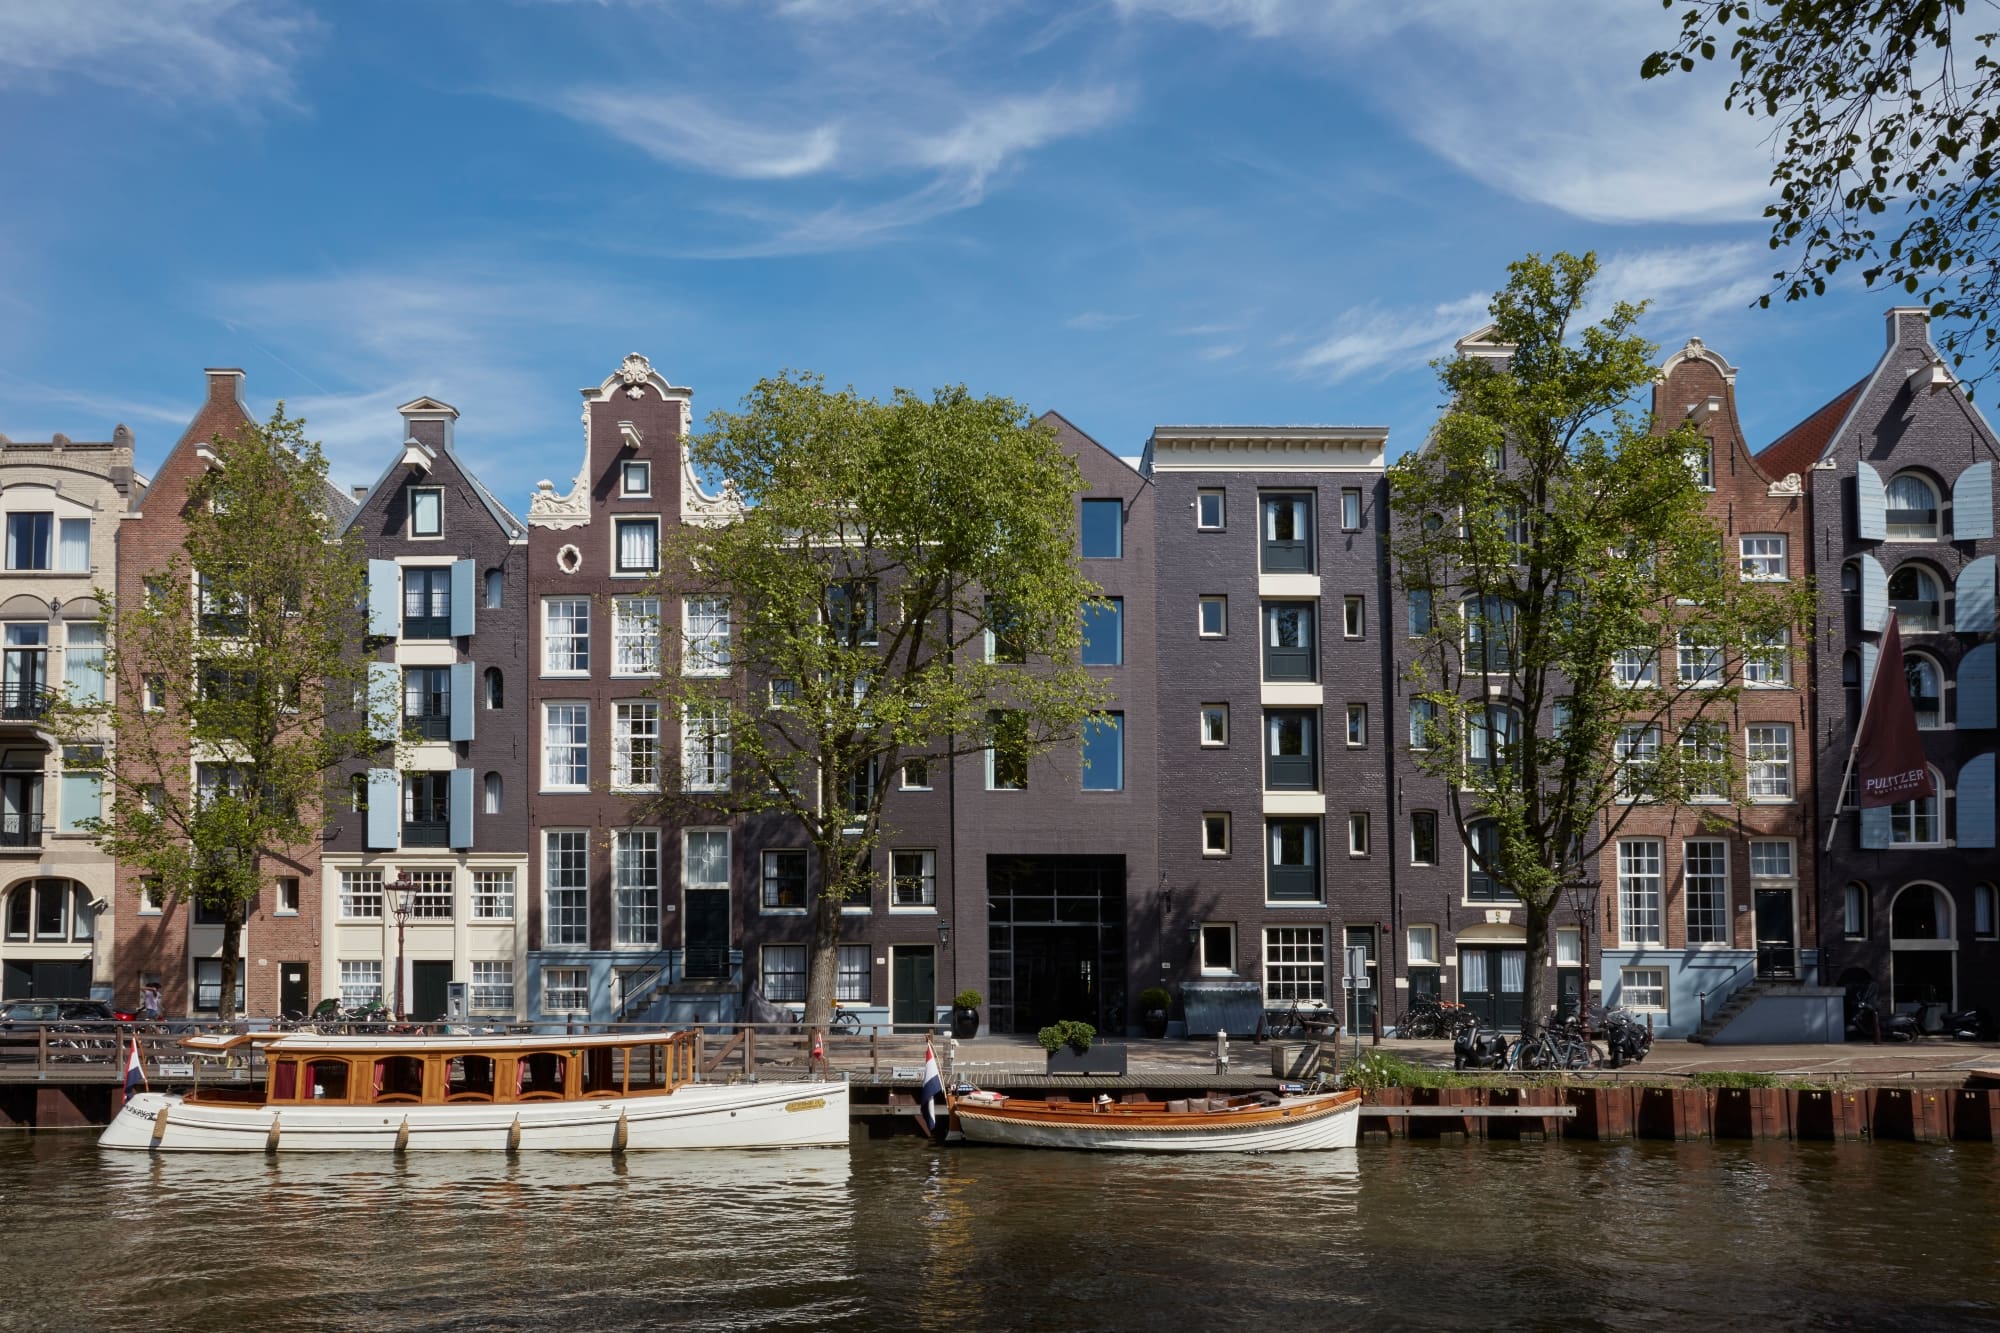 The bets hotels in Amsterdam | The Pulizer hotel sits on the edge of the canal where boats are going by.